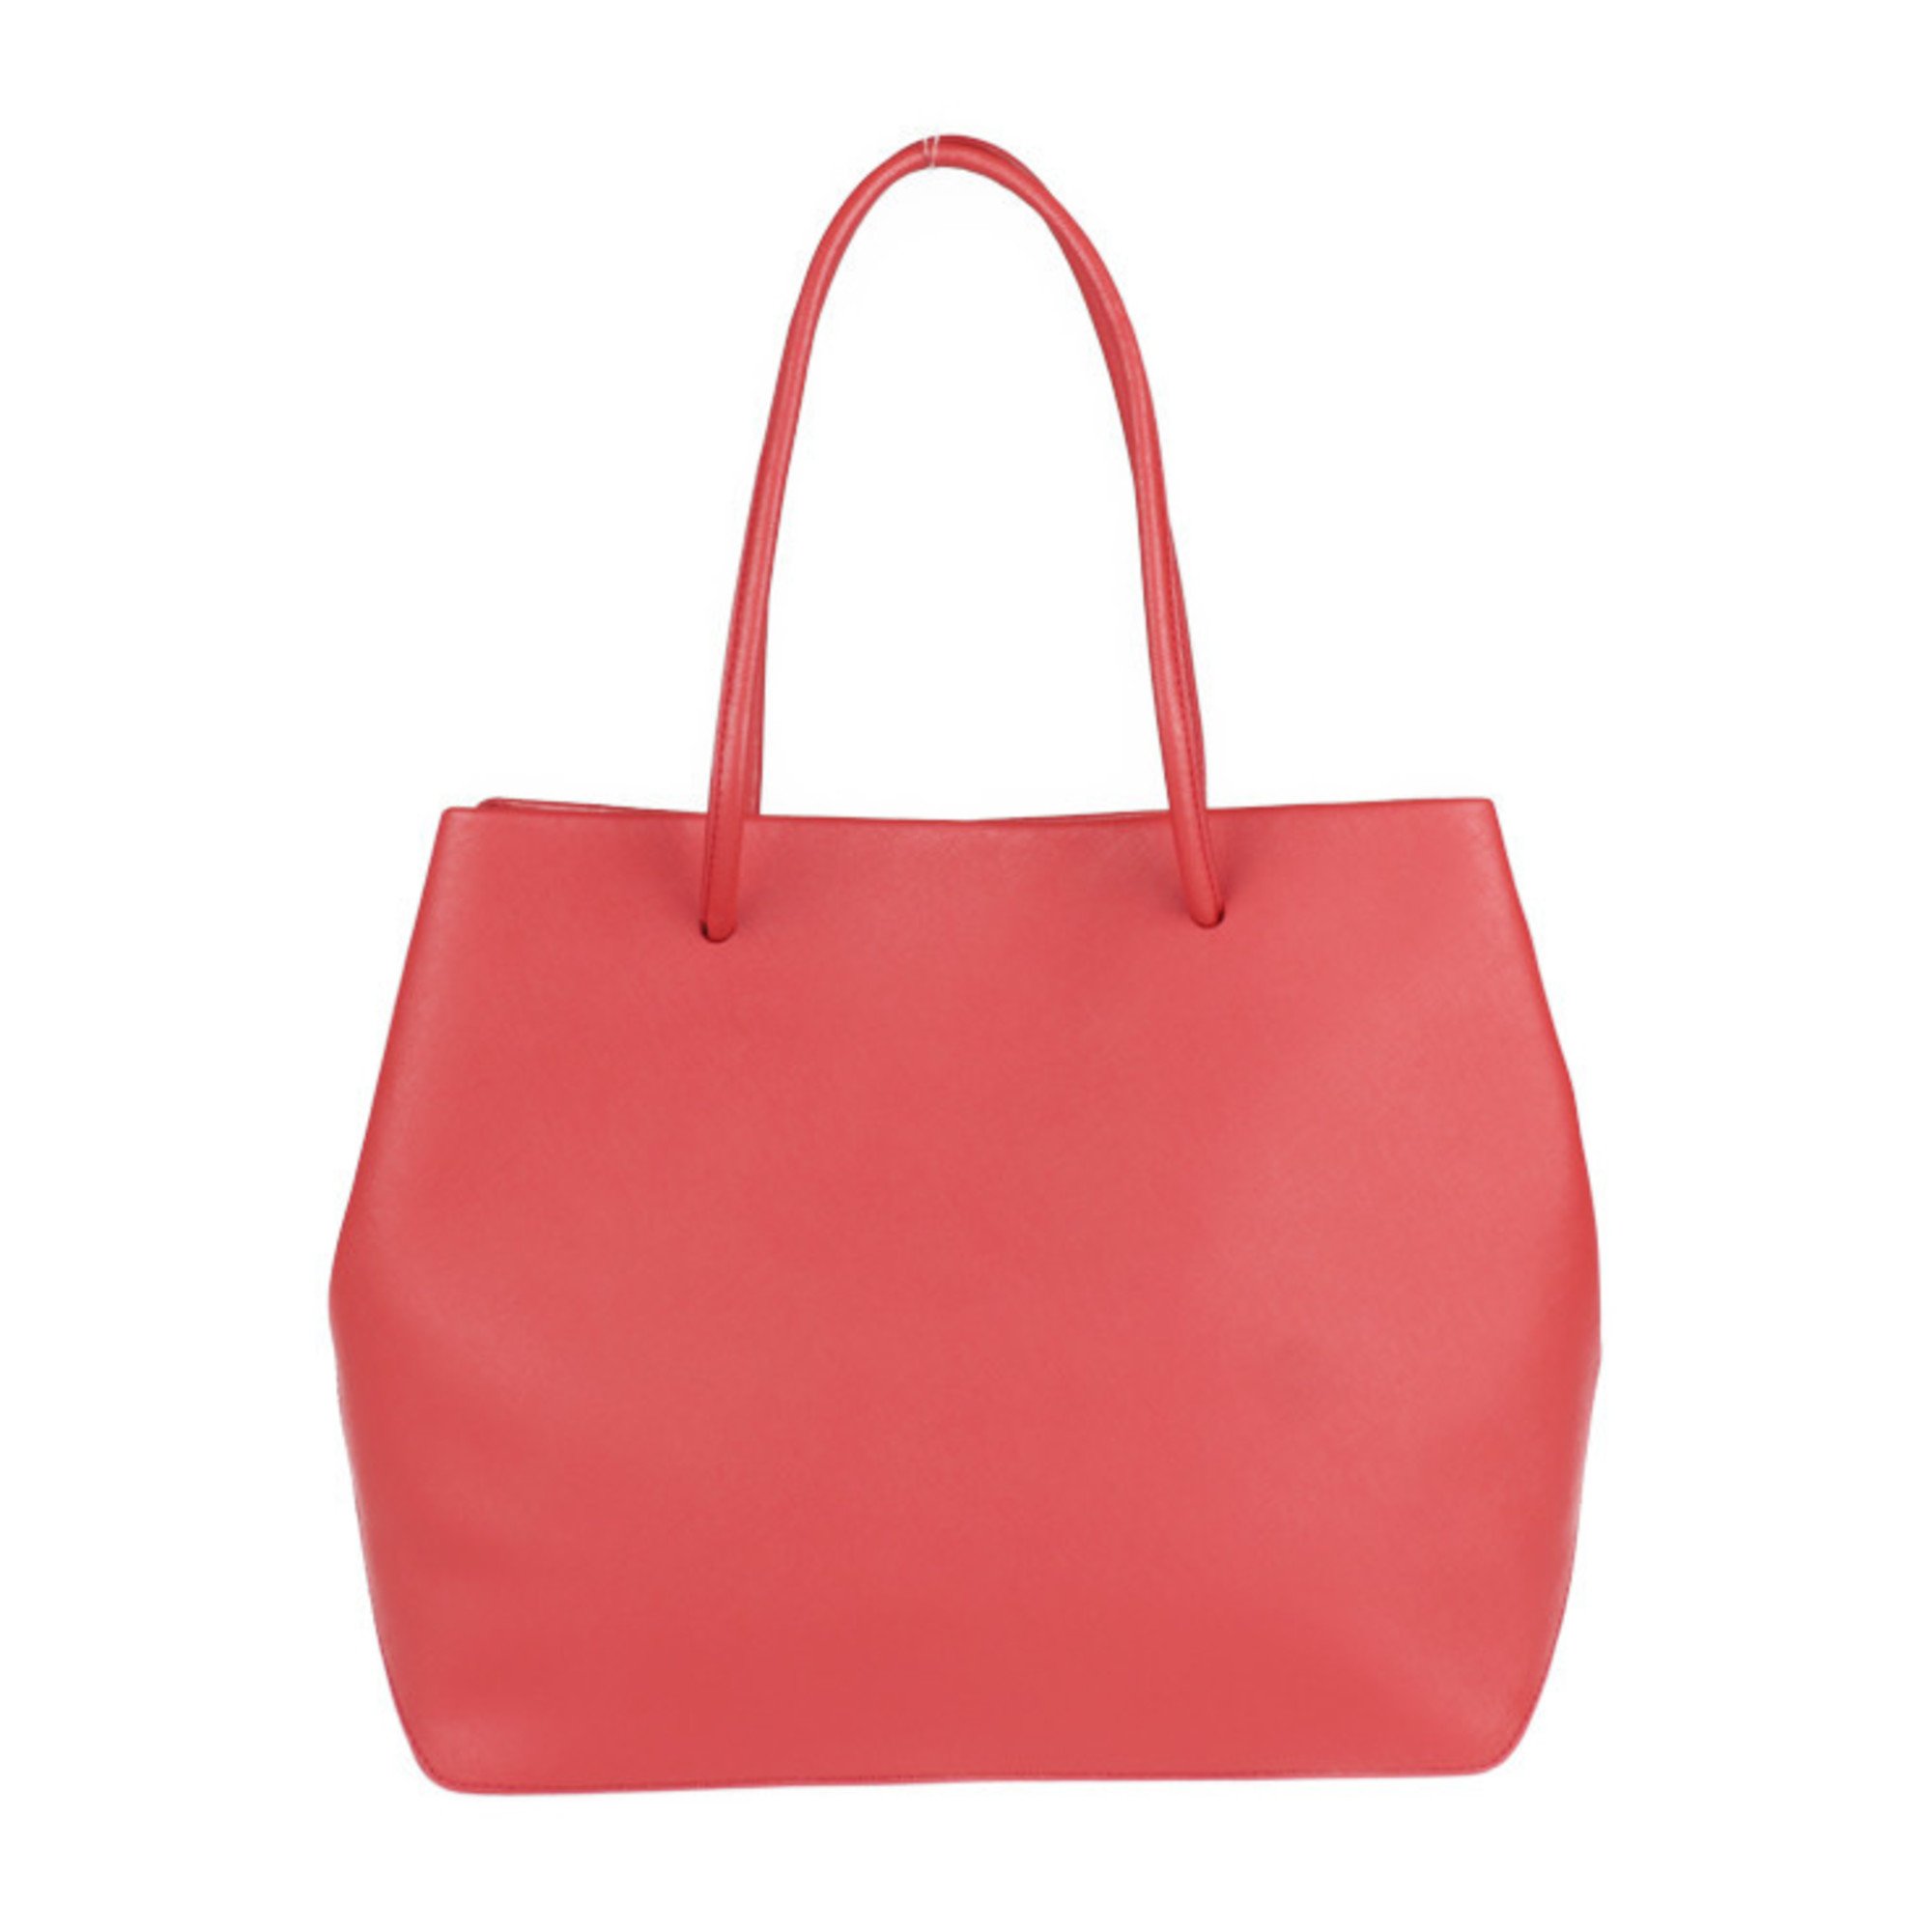 MARC JACOBS mark Jacobs logo shopper tote bag M0015766 leather BRIGHT RED red system shoulder Thoth